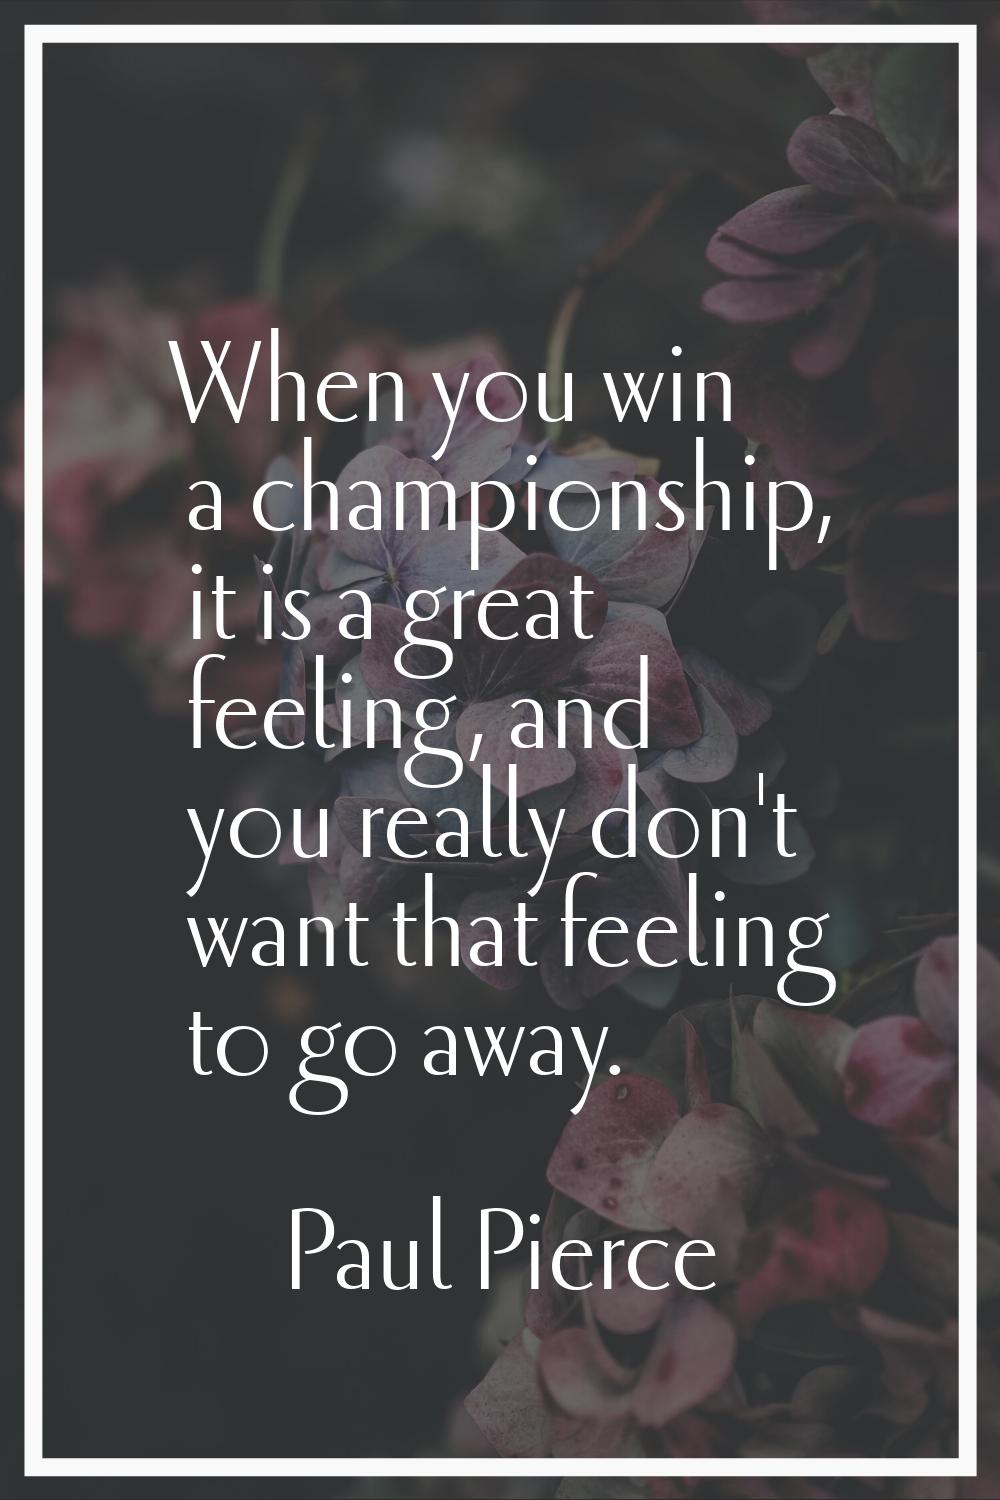 When you win a championship, it is a great feeling, and you really don't want that feeling to go aw